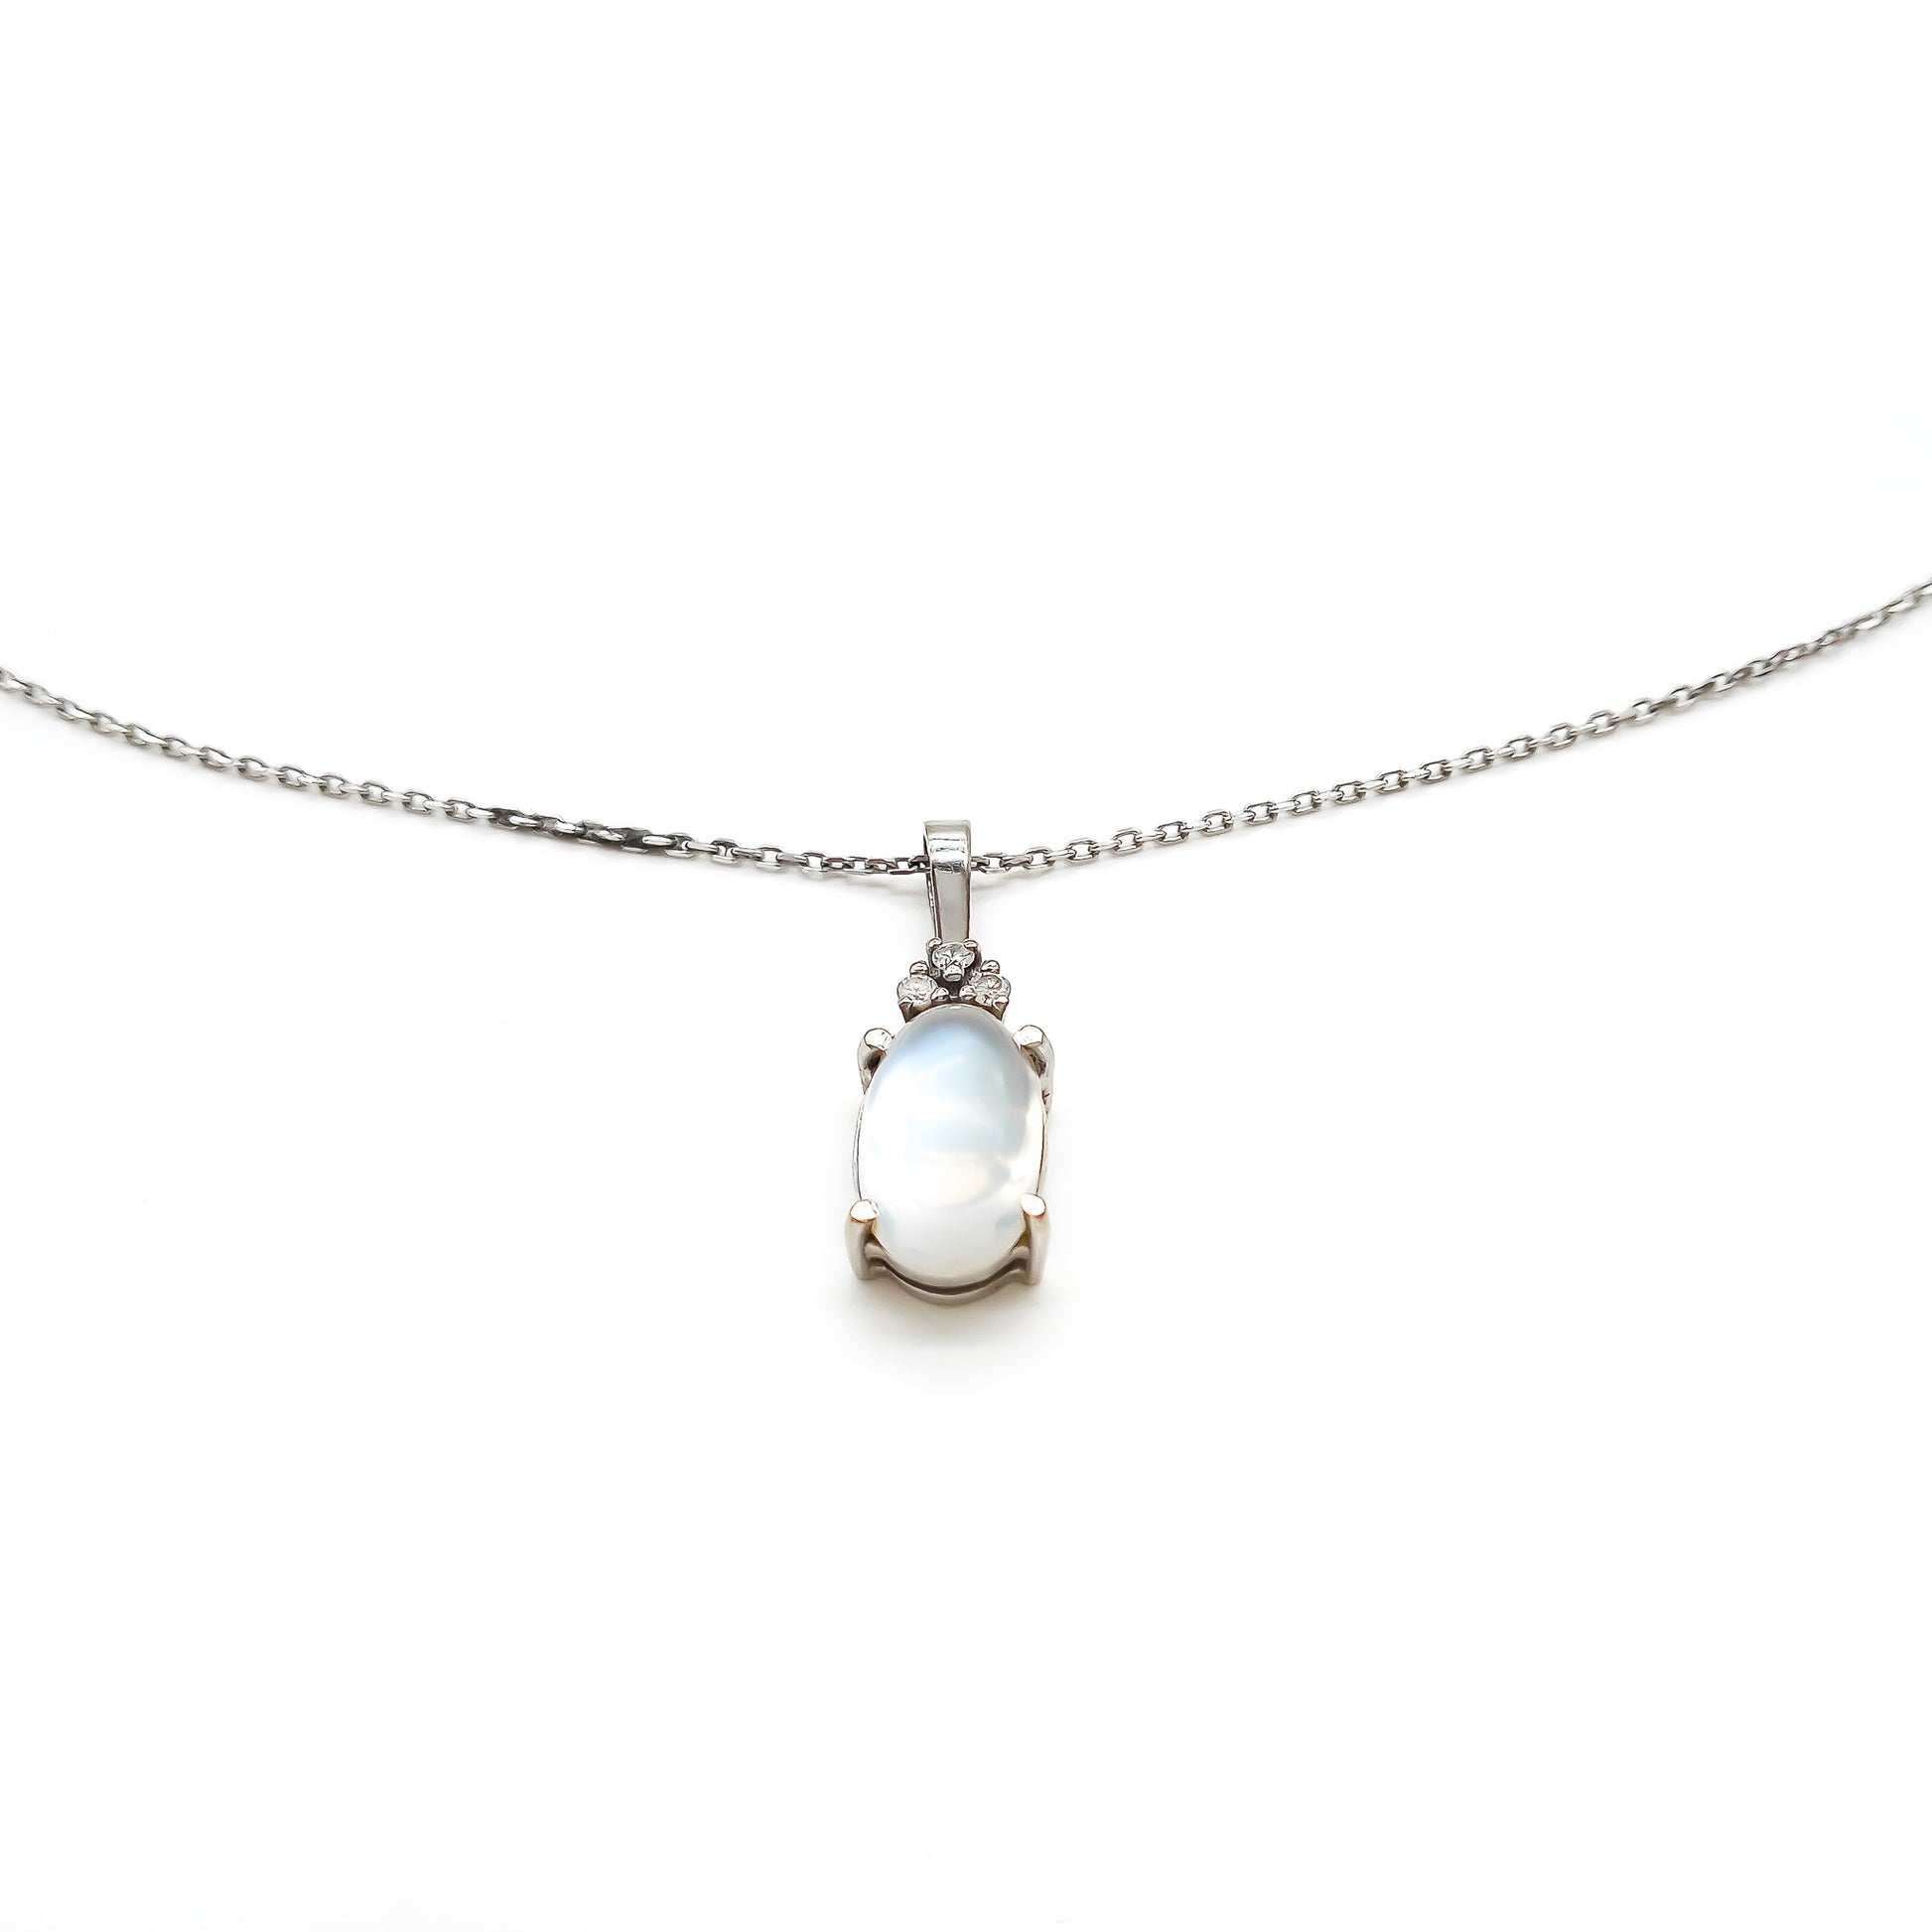 Delicate 18ct white gold pendant set with three small diamonds and a beautiful oval moonstone, on an 18ct white gold chain.